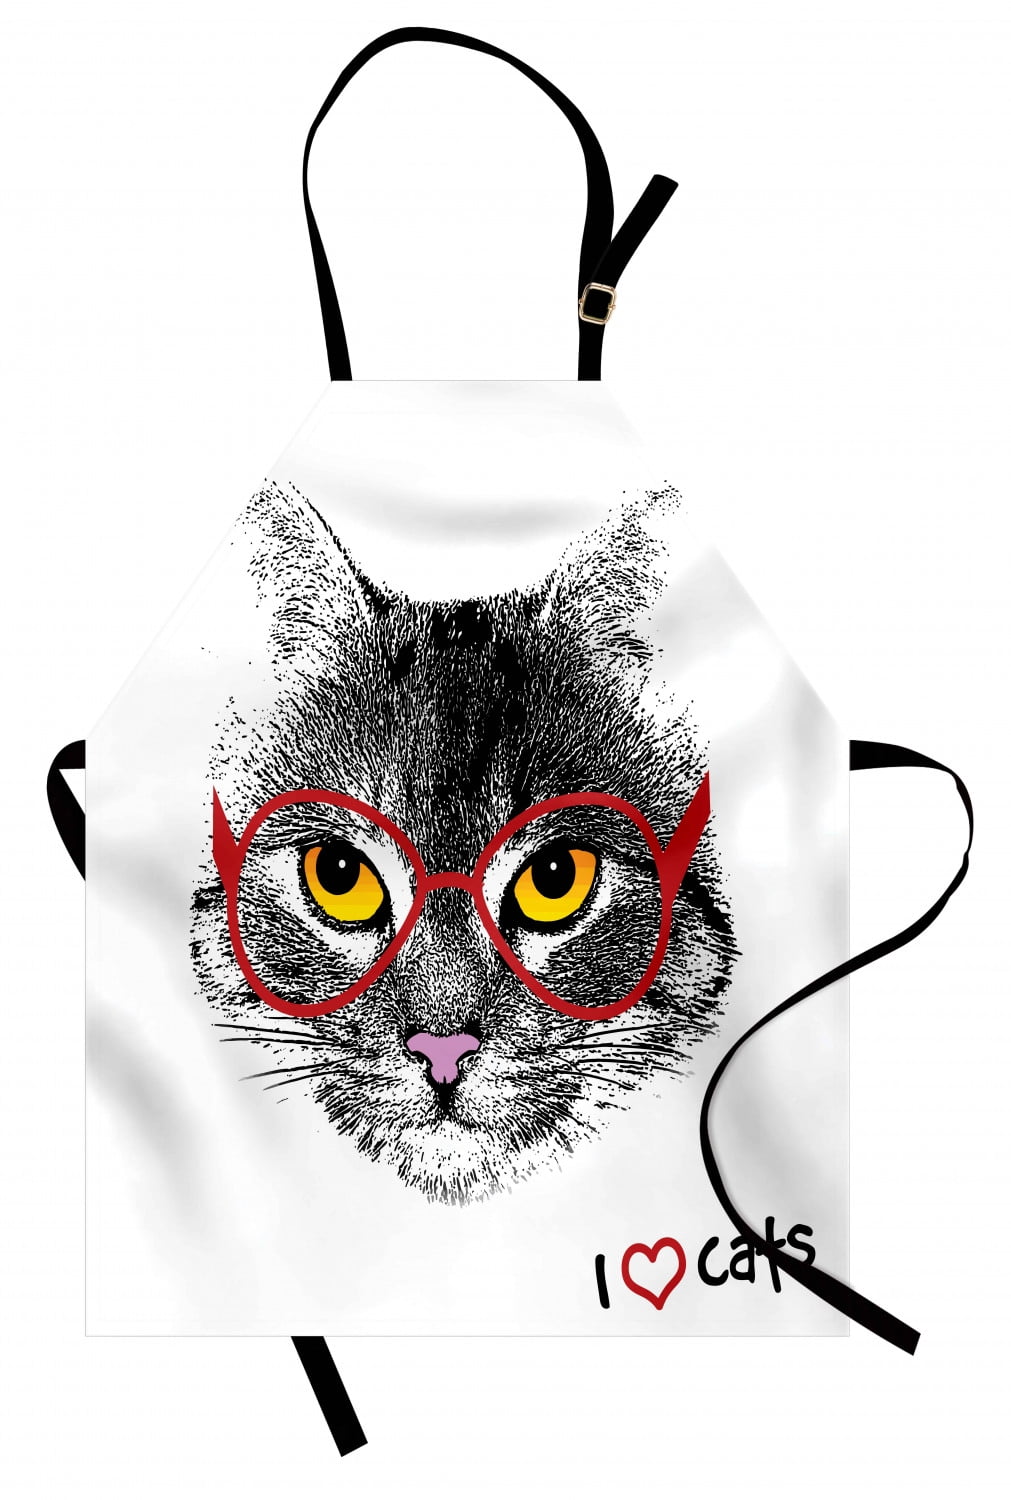 Cat Apron Wise Nerd Cat With Glasses Judging The World Humor Digital Style Art Illustration